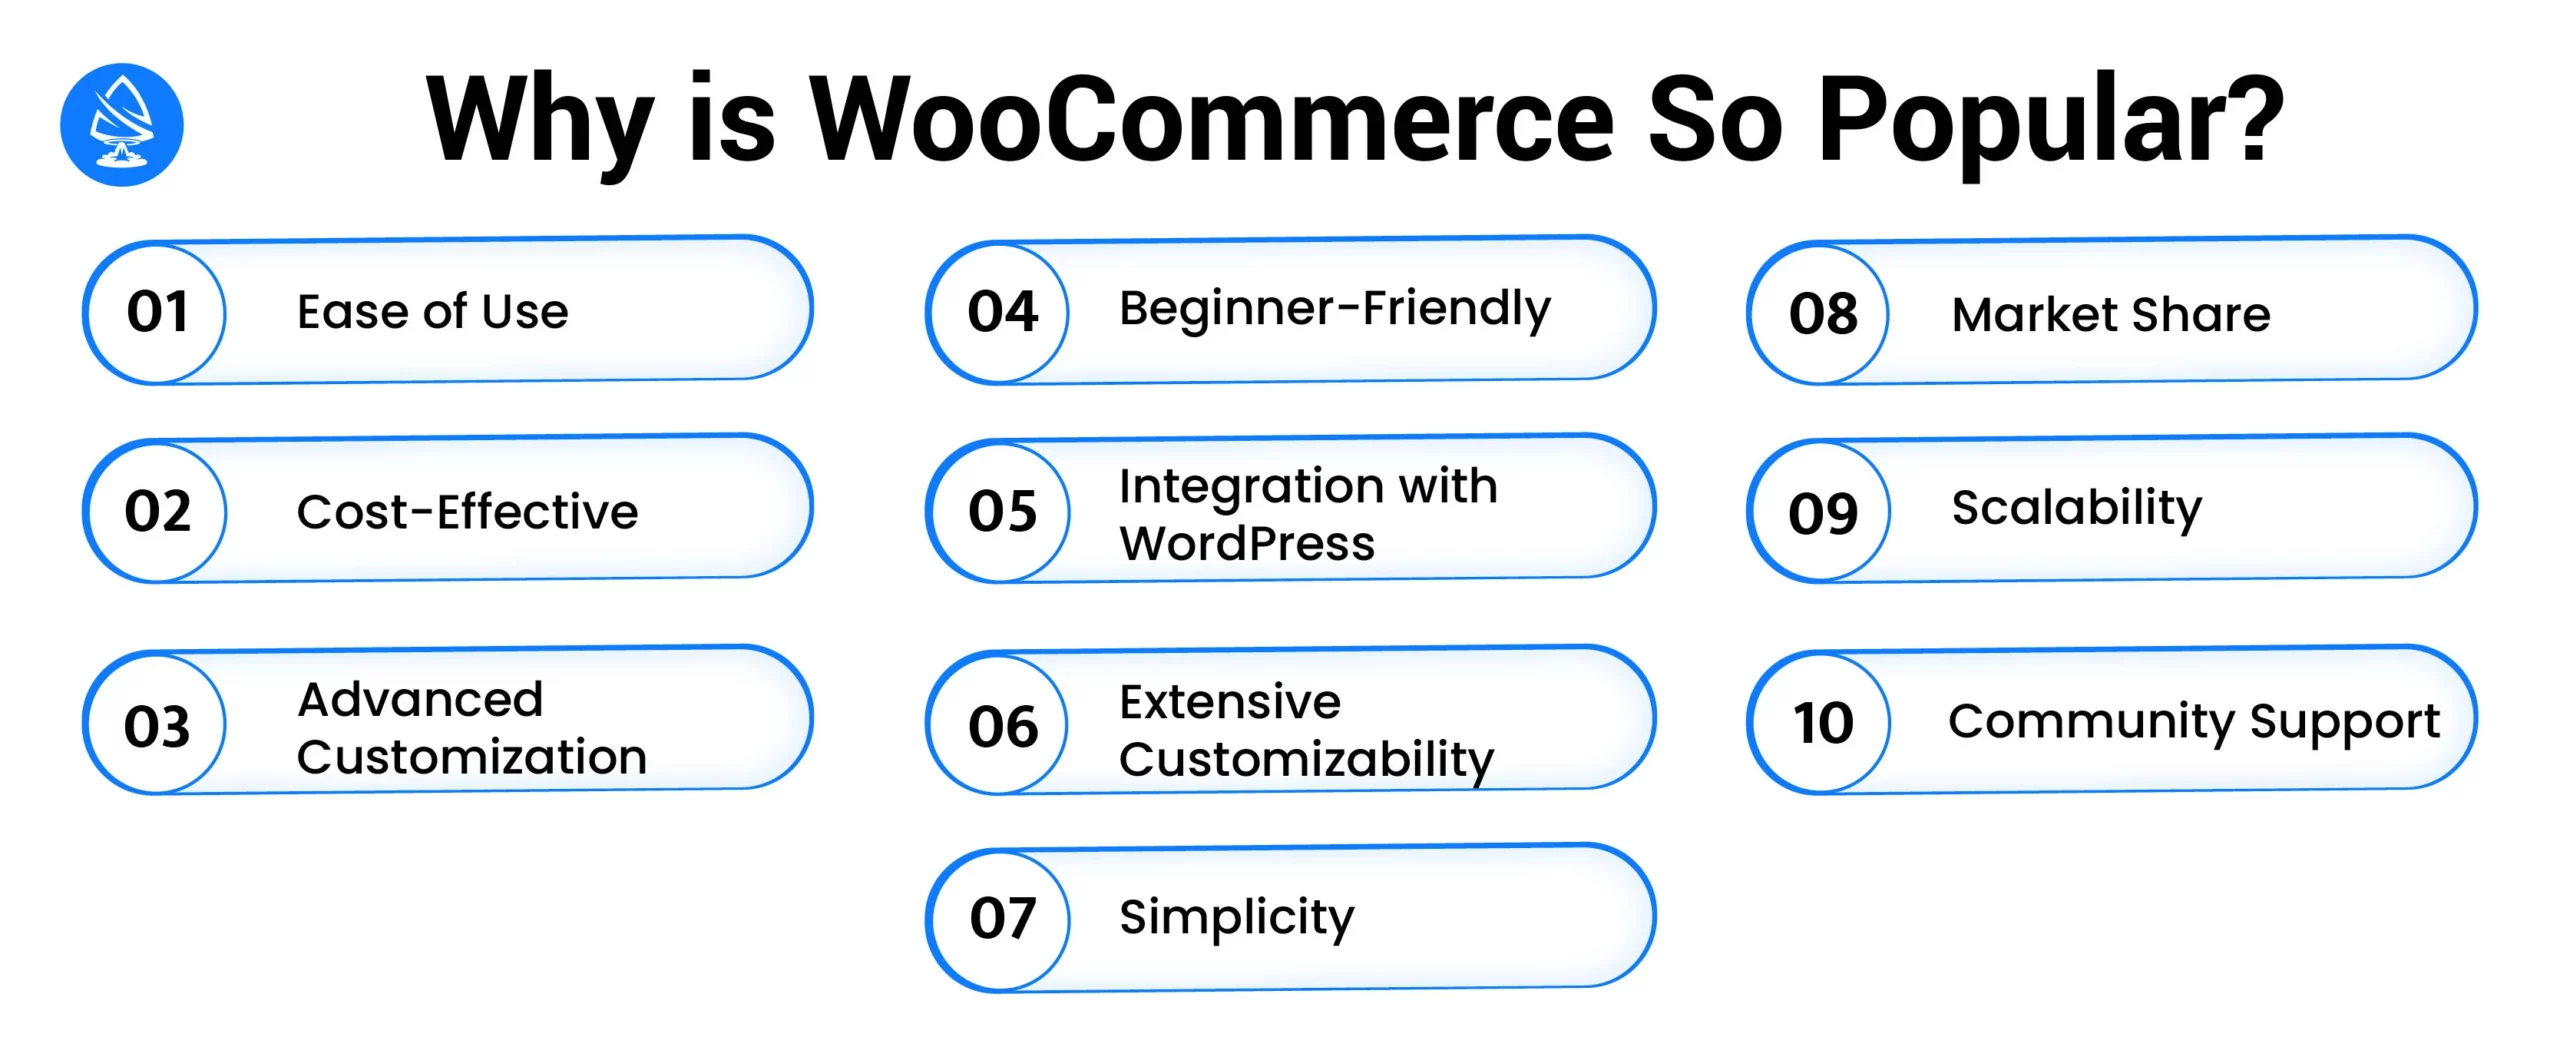 Why Is WooCommerce So Popular